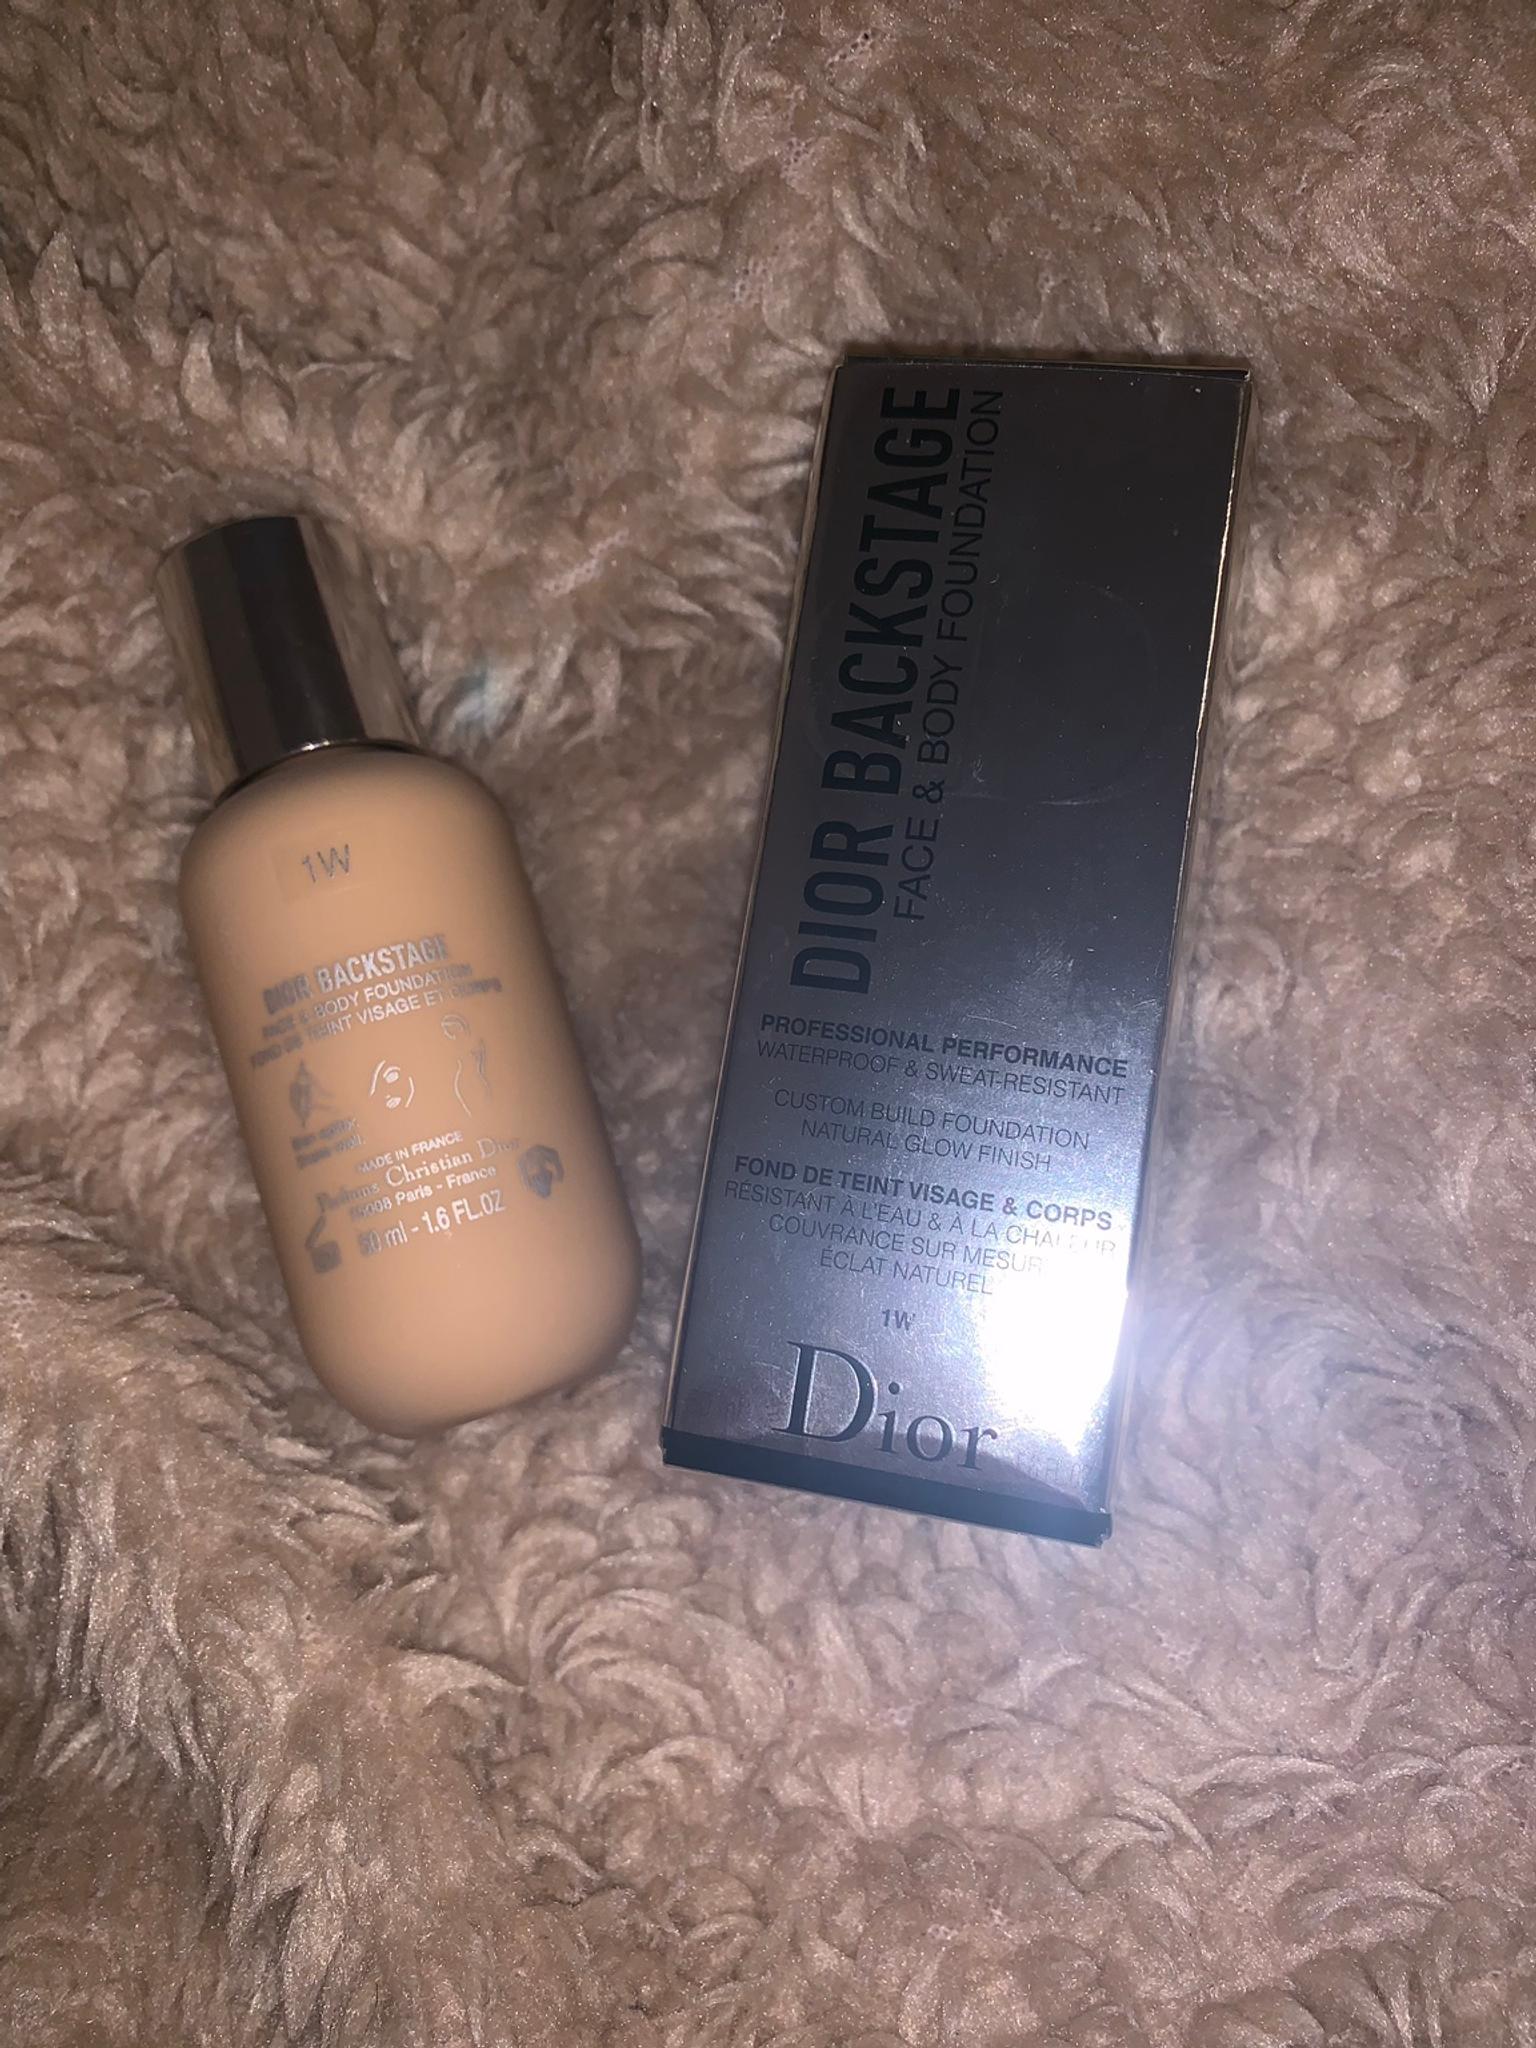 Dior Backstage Foundation In 1100 Wien For 30 00 For Sale Shpock